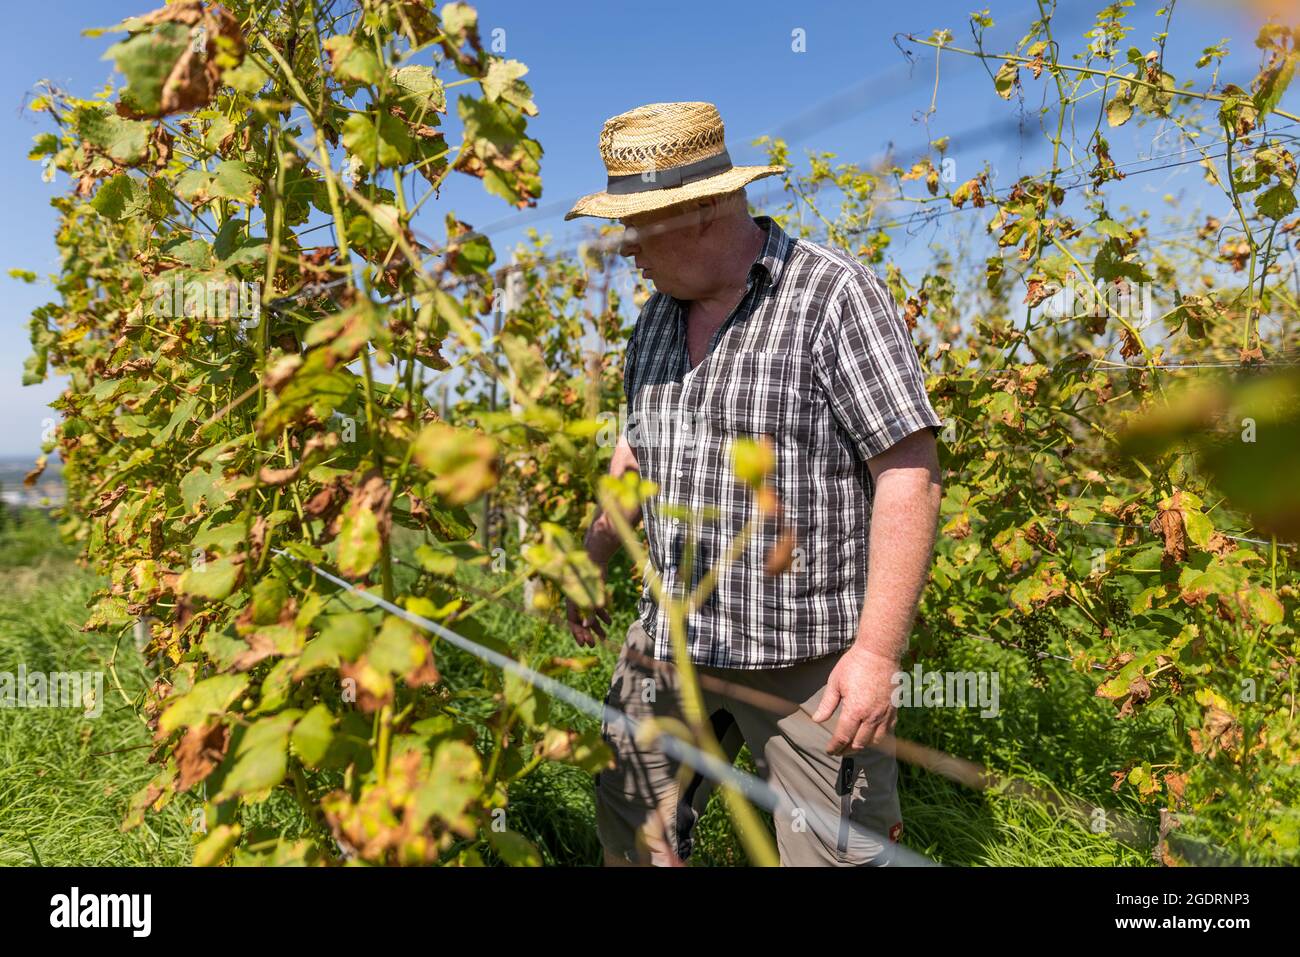 Auggen, Germany. 12th Aug, 2021. Jürgen Gugelmeier, chairman of the board of the Winzerkeller Auggener Schäf wine cooperative, inspects leaves and grapes damaged by the so-called downy mildew (peronospora) in a particularly heavily infested vineyard. The owner of the vines (not in the picture) had made a mistake in plant protection. The vintners in the southwest expect a smaller harvest in 2021. According to the association, they are worried about the fungal infestation, among other things. Regionally, harvest losses of up to 40 percent are expected. Credit: Philipp von/dpa/Alamy Live News Stock Photo